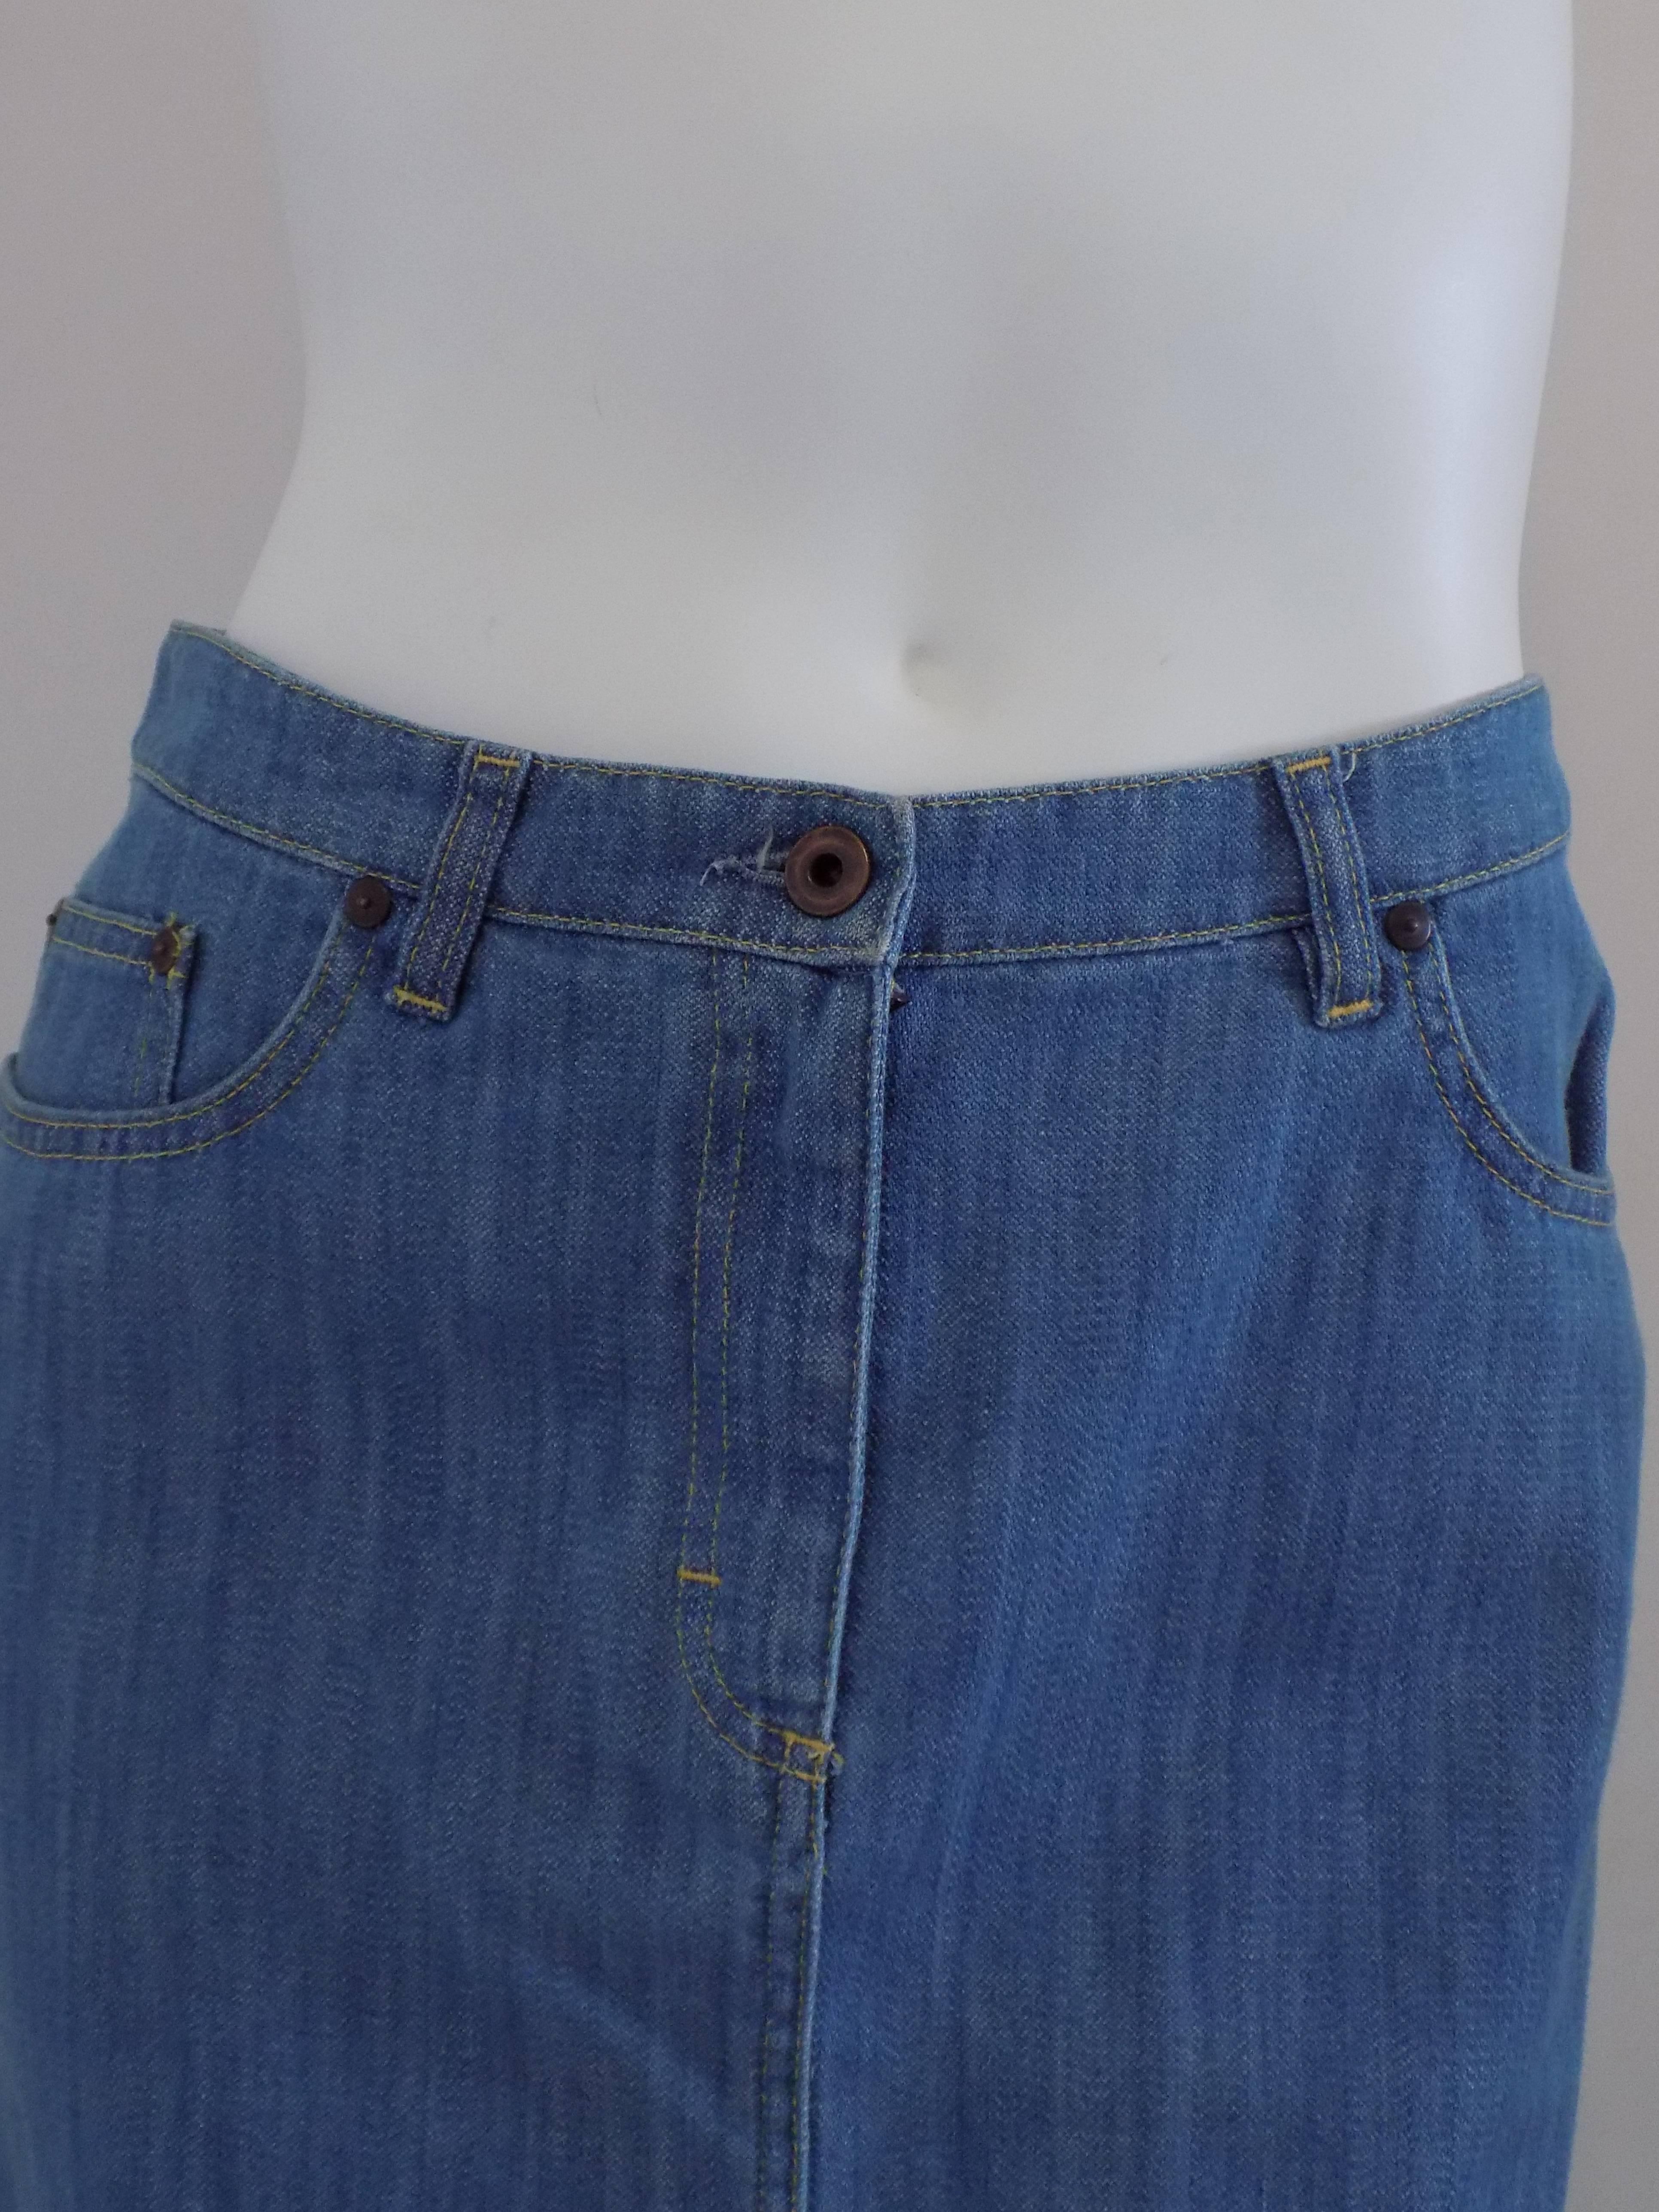 Miu Miu denim skirt totally made in italy in 100 cotton
total lenght 59 cm
waist 76 cm
size 27